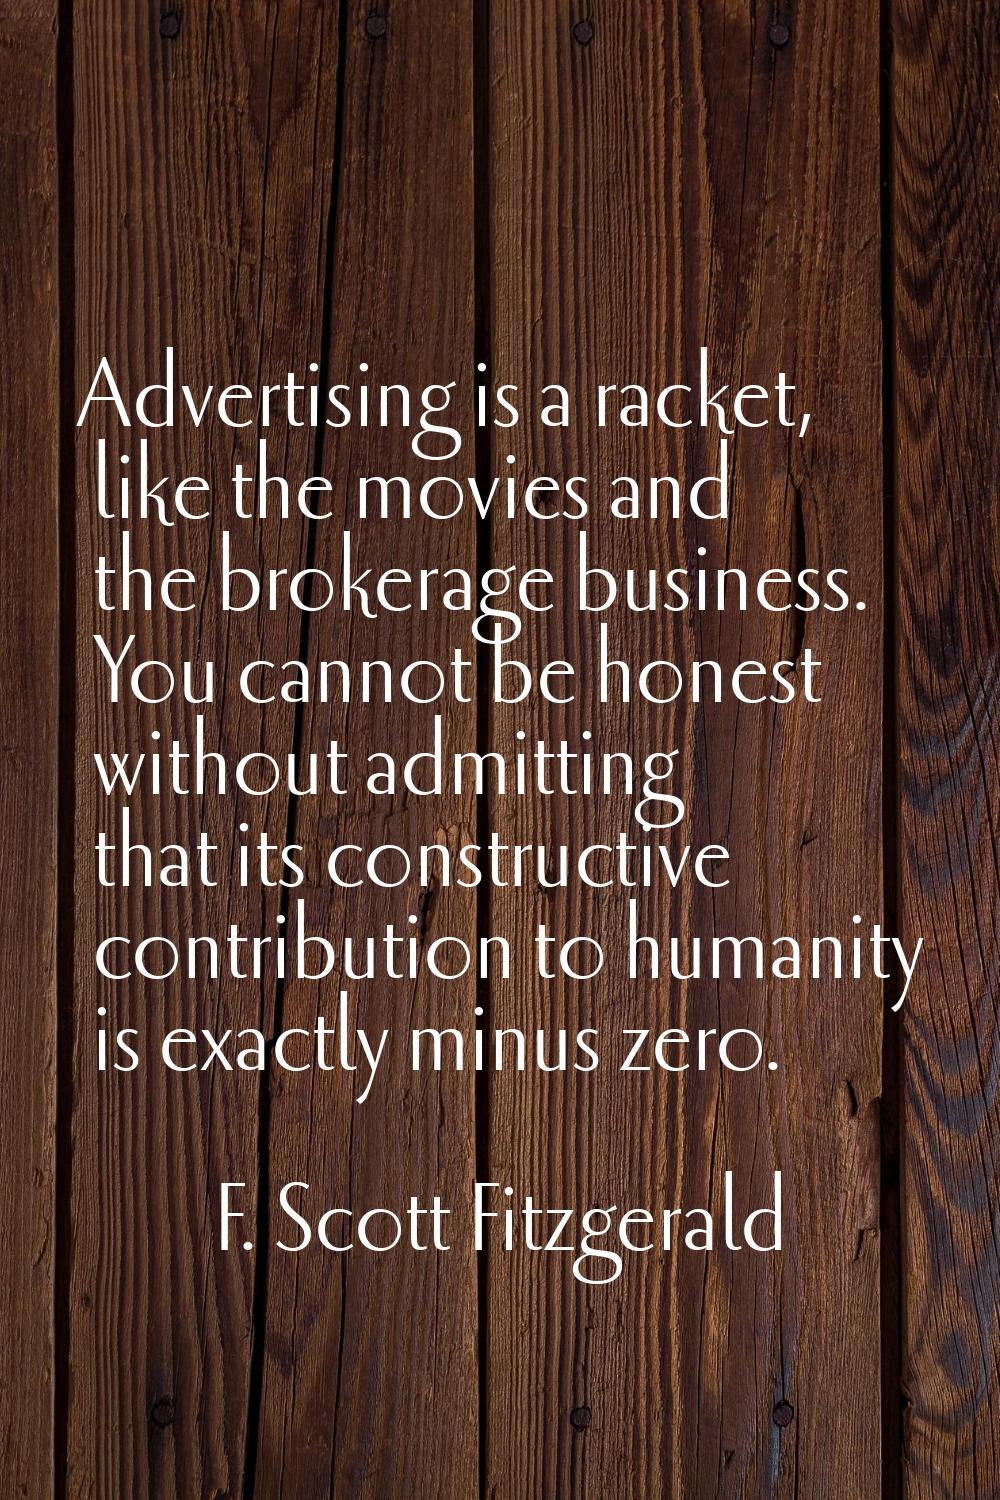 Advertising is a racket, like the movies and the brokerage business. You cannot be honest without a